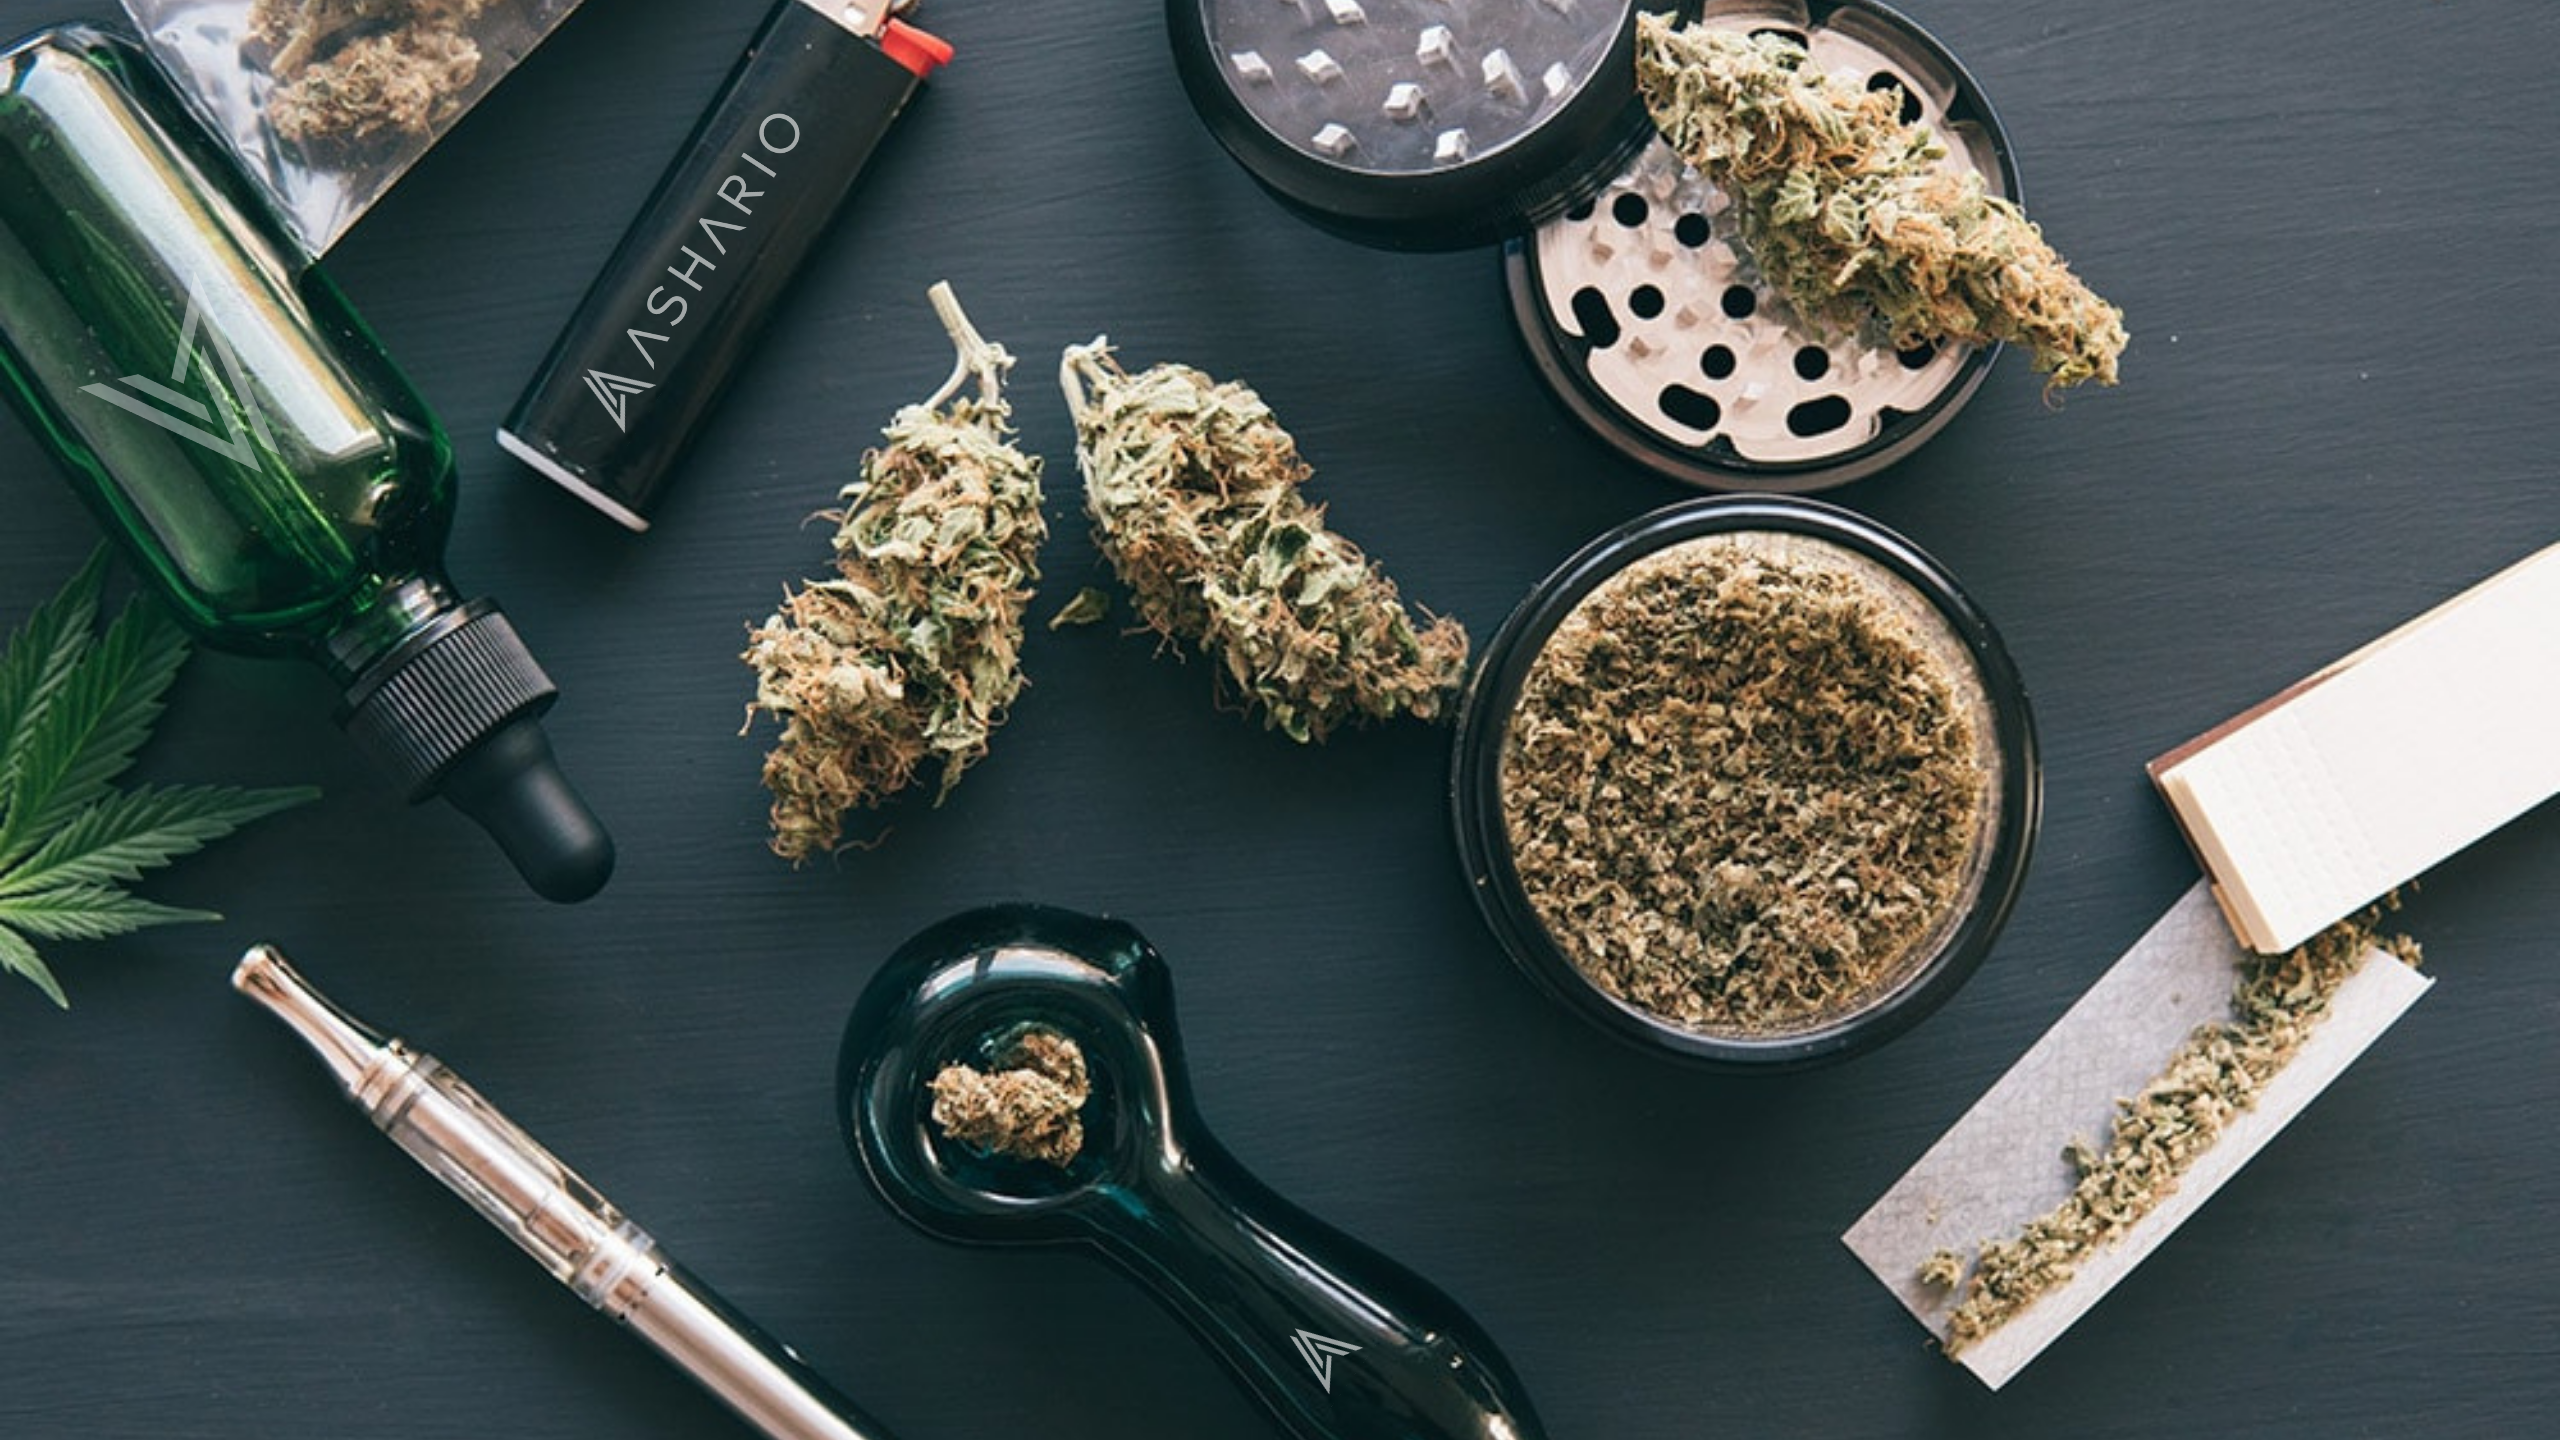 Explore excellence with Ashario's premium THC products online, offering convenience and exceptional customer service.